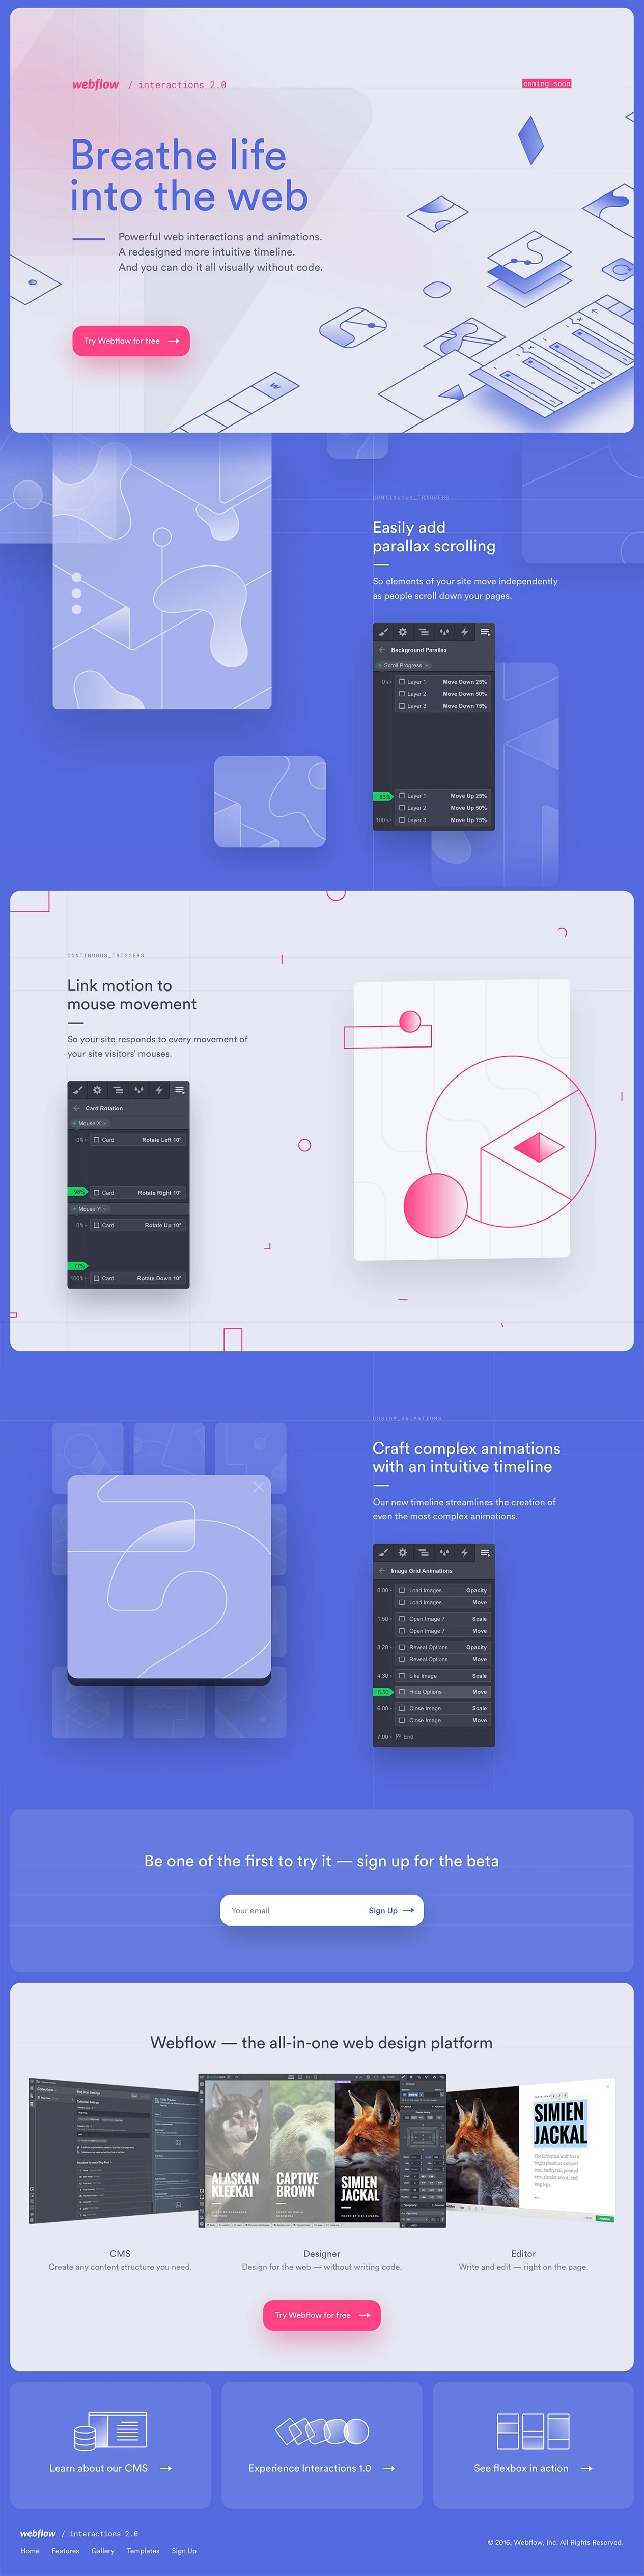 Webflow Interactions 2.0 Landing Page Example: Parallax scrolling, mouse tracking, timeline animations, and more. A whole new way to craft interactions and animations — and you still don't have to write any code.